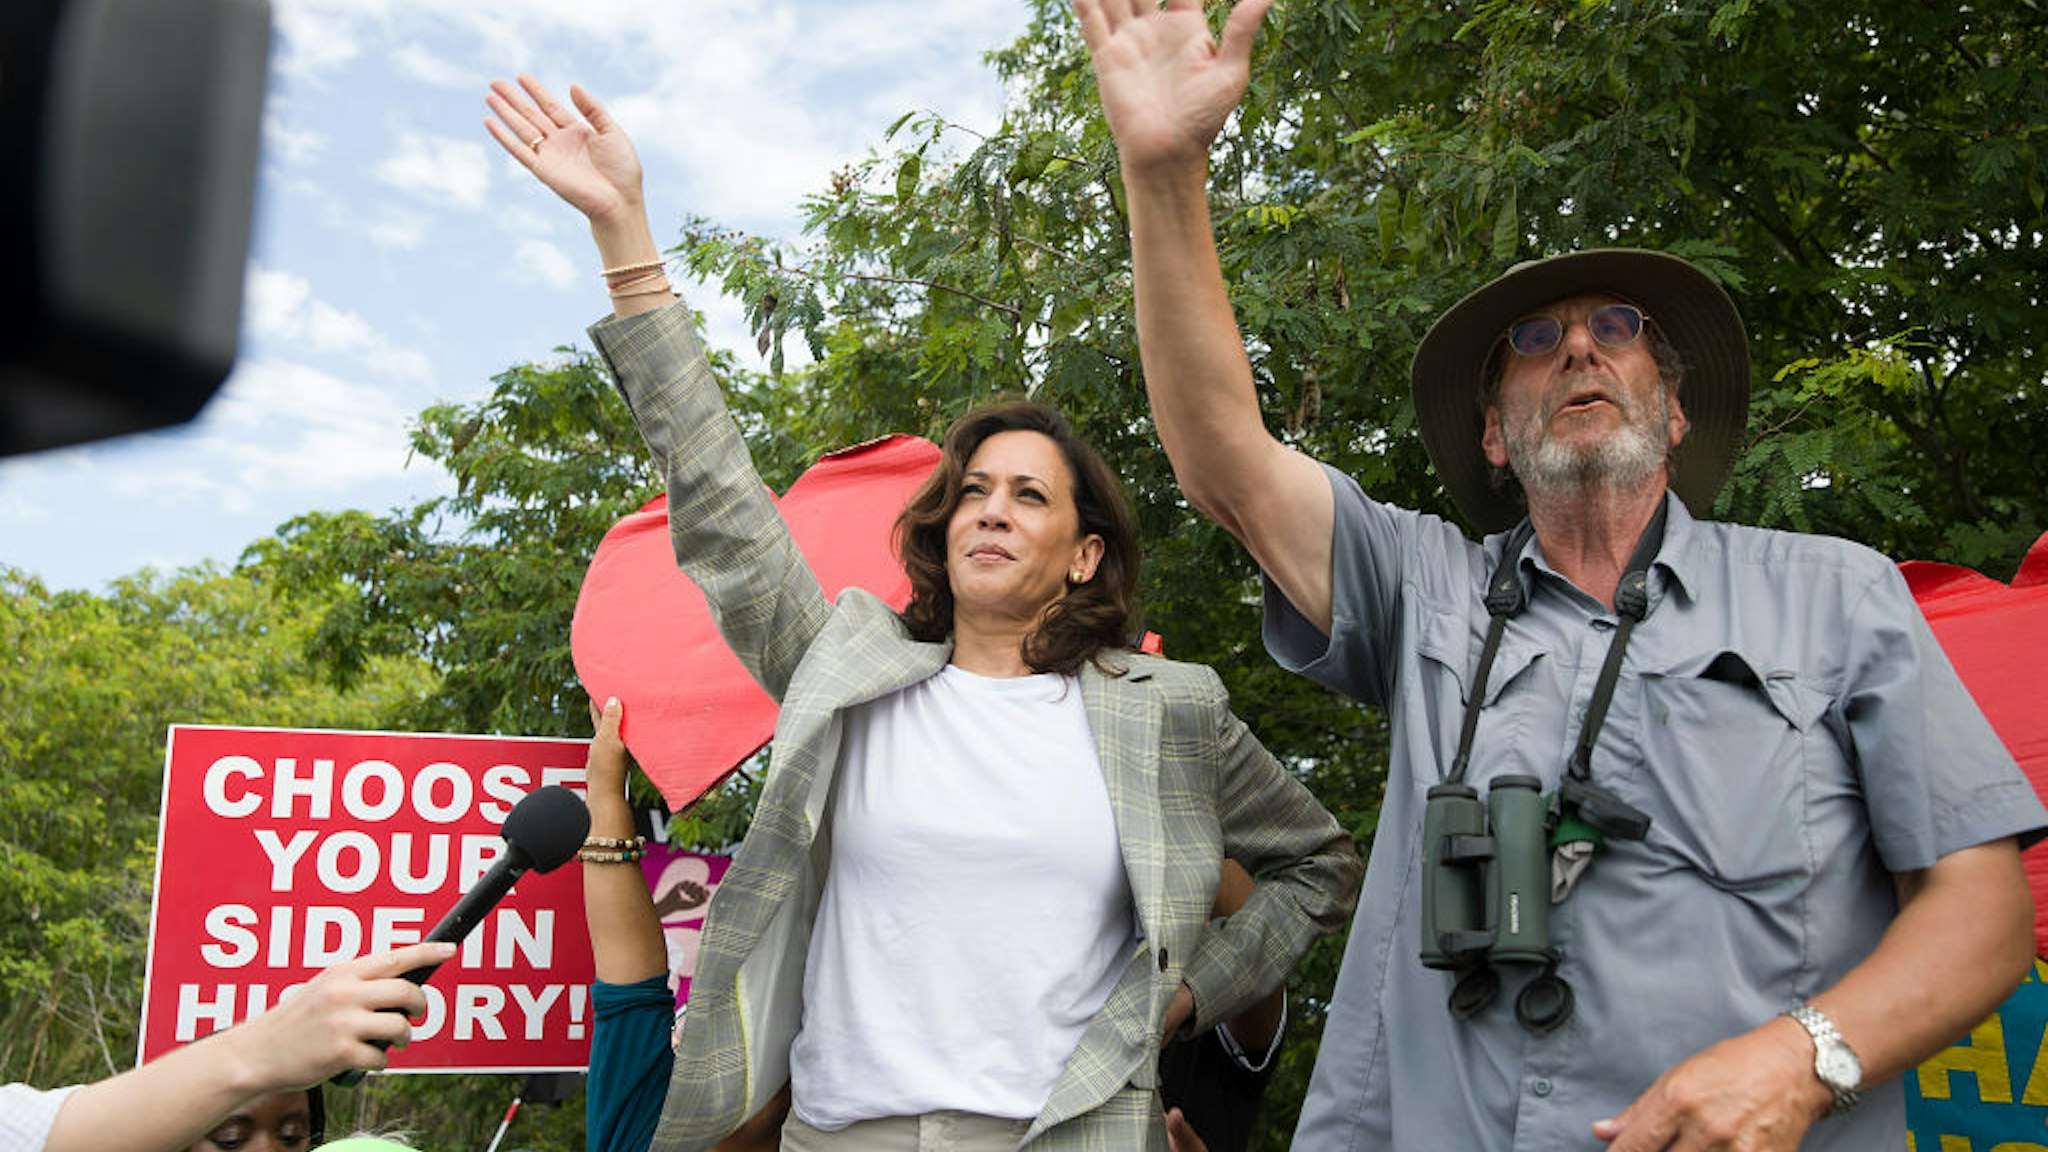 HOMESTEAD, FLORIDA - JUNE 28: Democratic Presidential candidate, Sen. Kamala Harris (D-CA) waves to children as she stands on a ladder to see over a fence into the grounds of a detention center for migrant children on June 28, 2019 in Homestead, Florida. Democratic presidential candidates visited the detention center, which is the nation's largest center for detaining immigrant children, as the candidates spend time in the Miami area after participating in a nationally televised debate. (Photo by Joe Raedle/Getty Images)